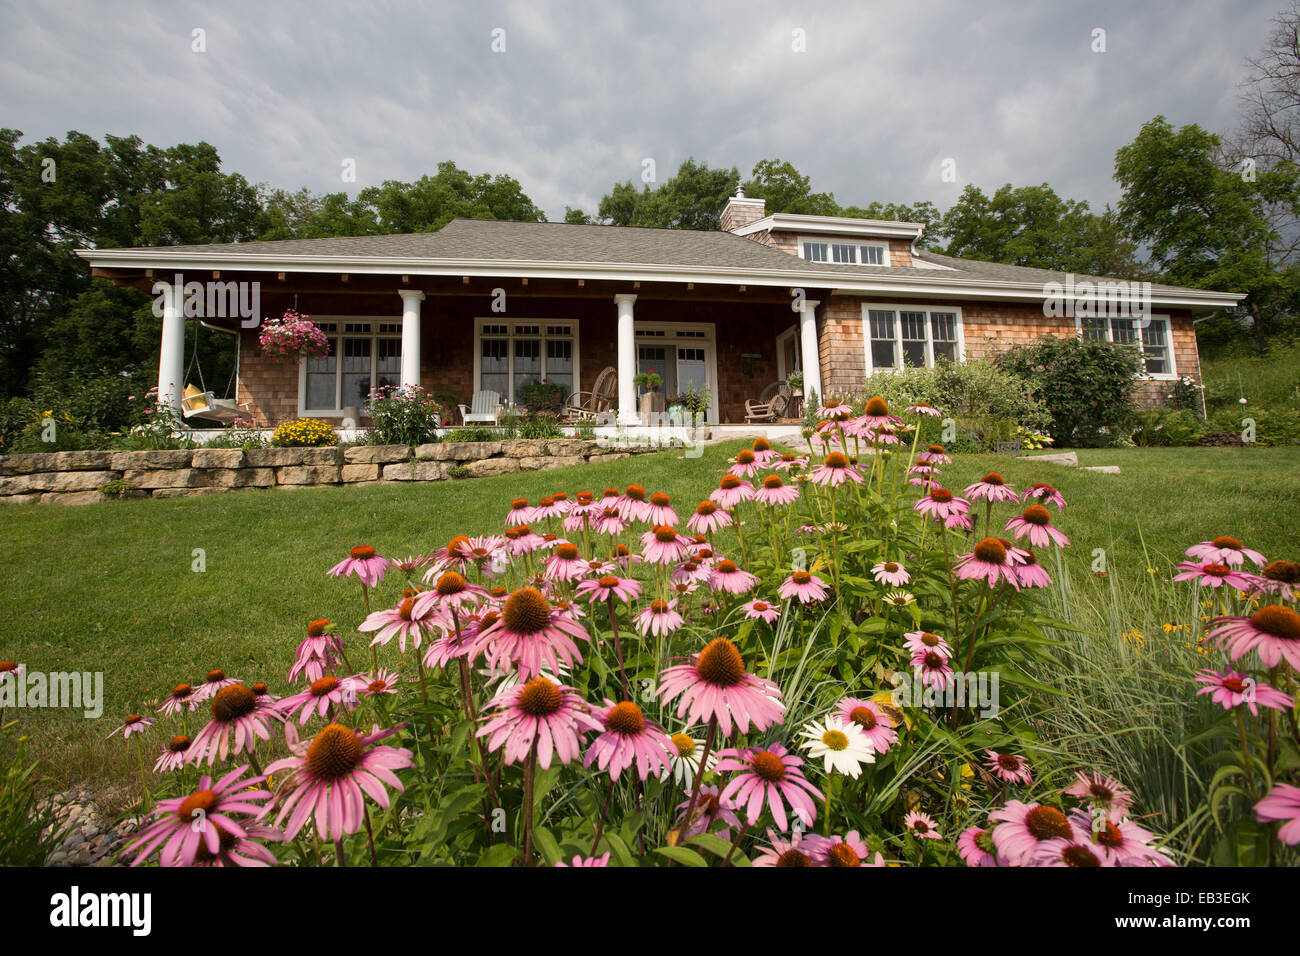 Flowers growing in front lawn of house Stock Photo